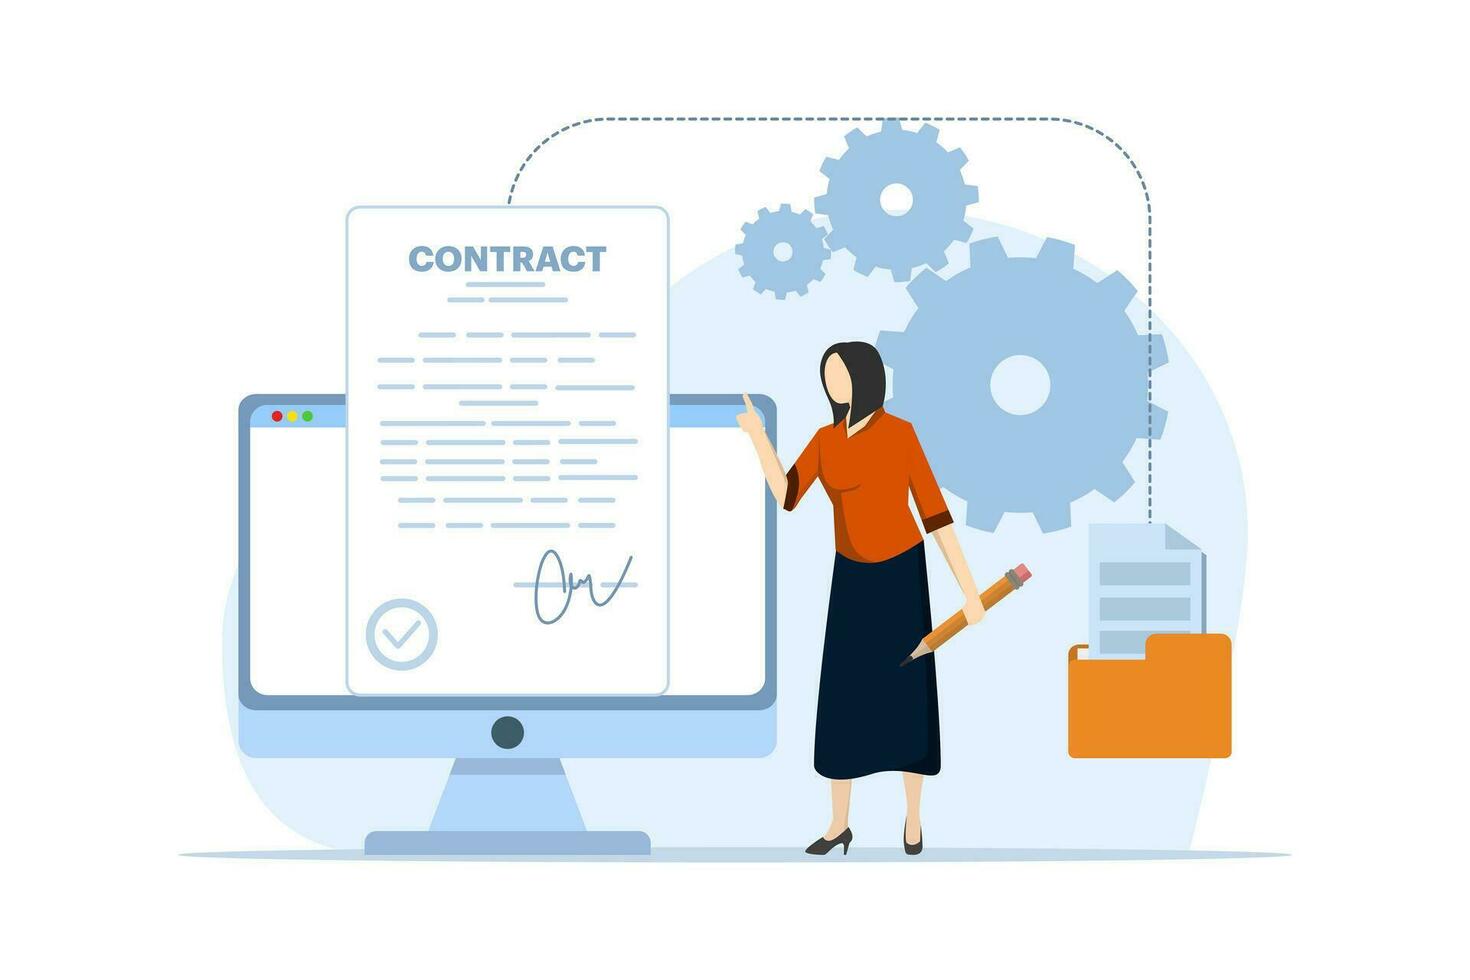 business contract concept, agreement illustration, teamwork and collaboration, partnership, business startup strategy, contract agreement signing characters. flat vector illustration on background.